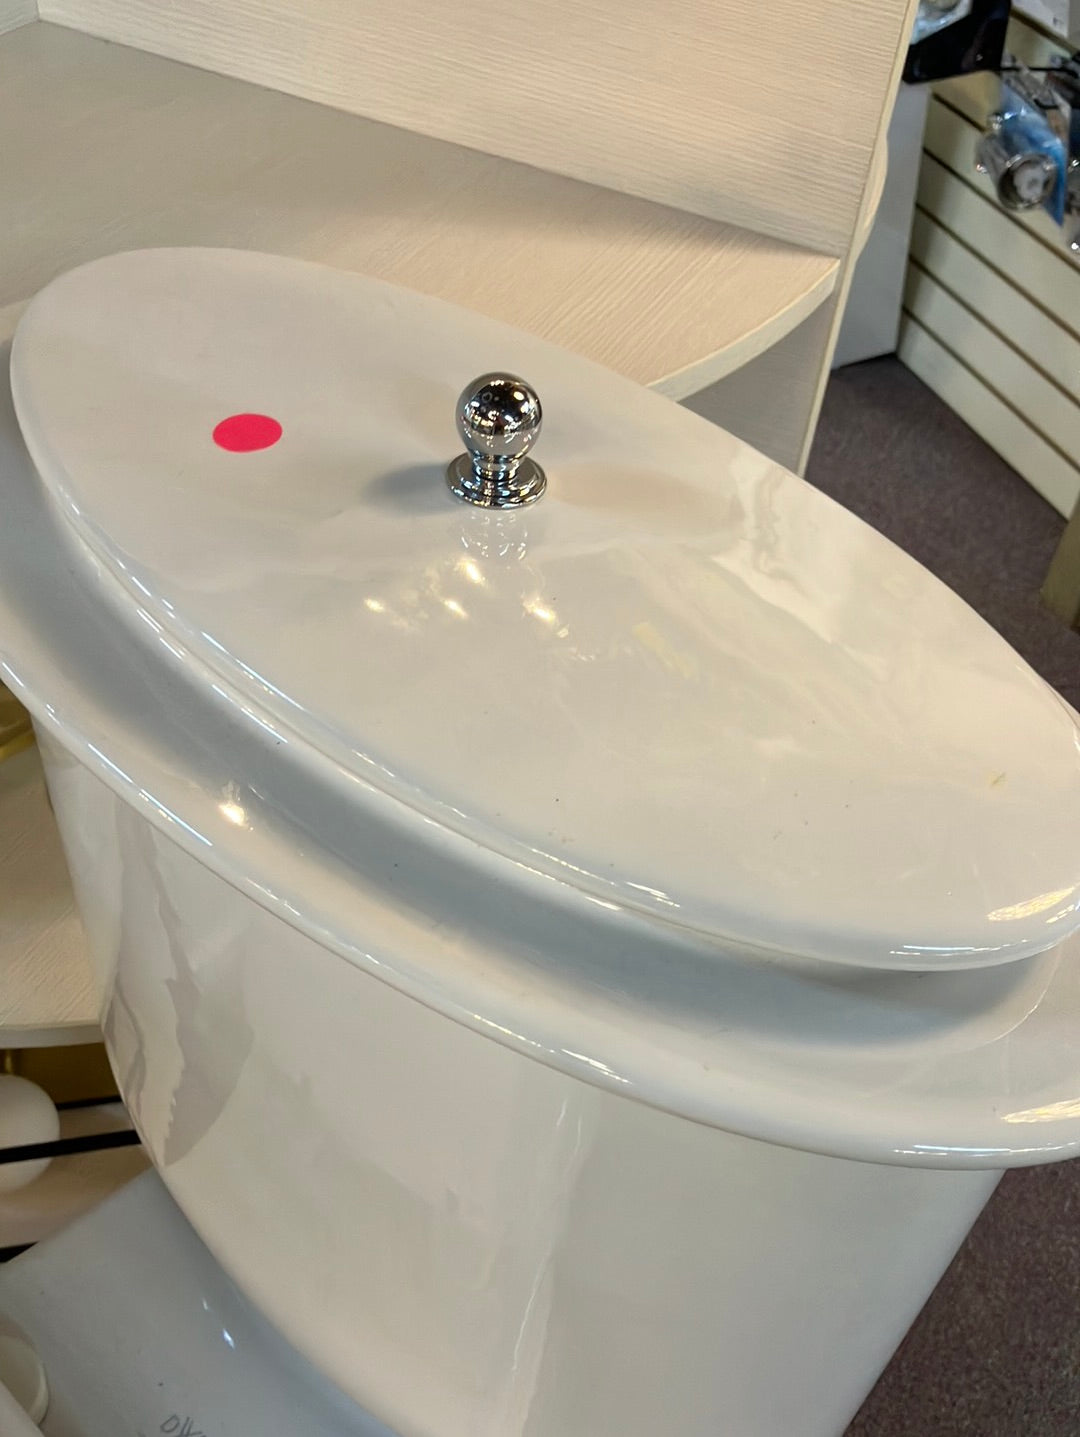 DXV Oak Hill 1.28 GPF Two Piece Elongated Toilet with Top Lever - Seat Included D2203AA1 White00.415